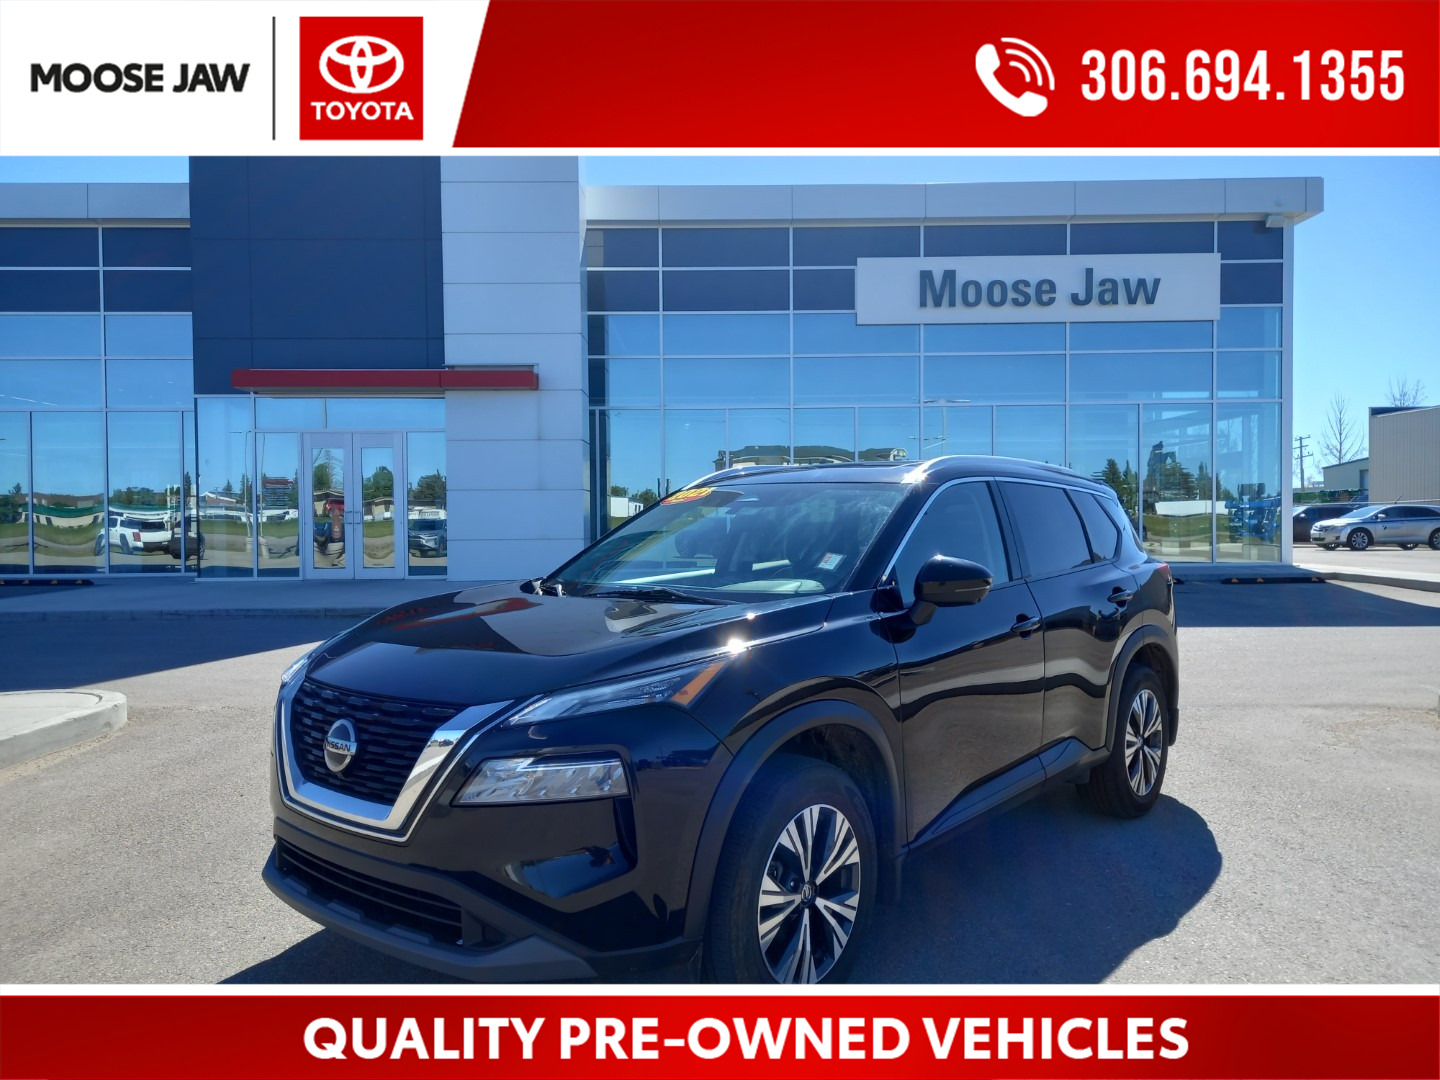 2021 Nissan Rogue SV FULLY EQUIPPED SV EDITION, PROPILOT ASSIST WITH